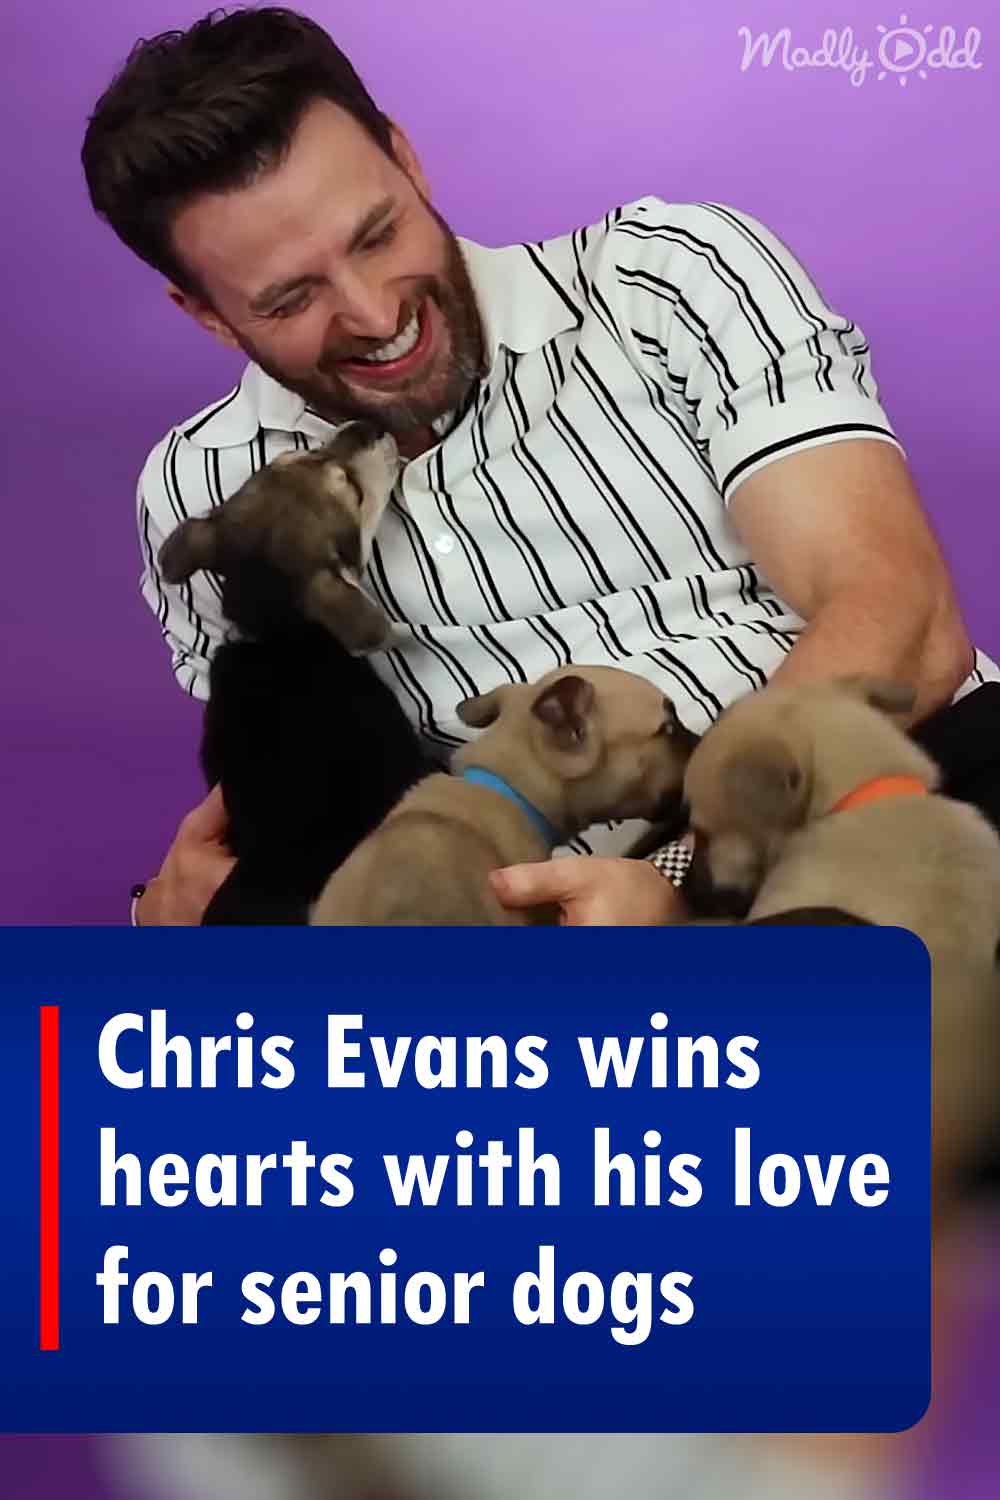 Chris Evans wins hearts with his love for senior dogs